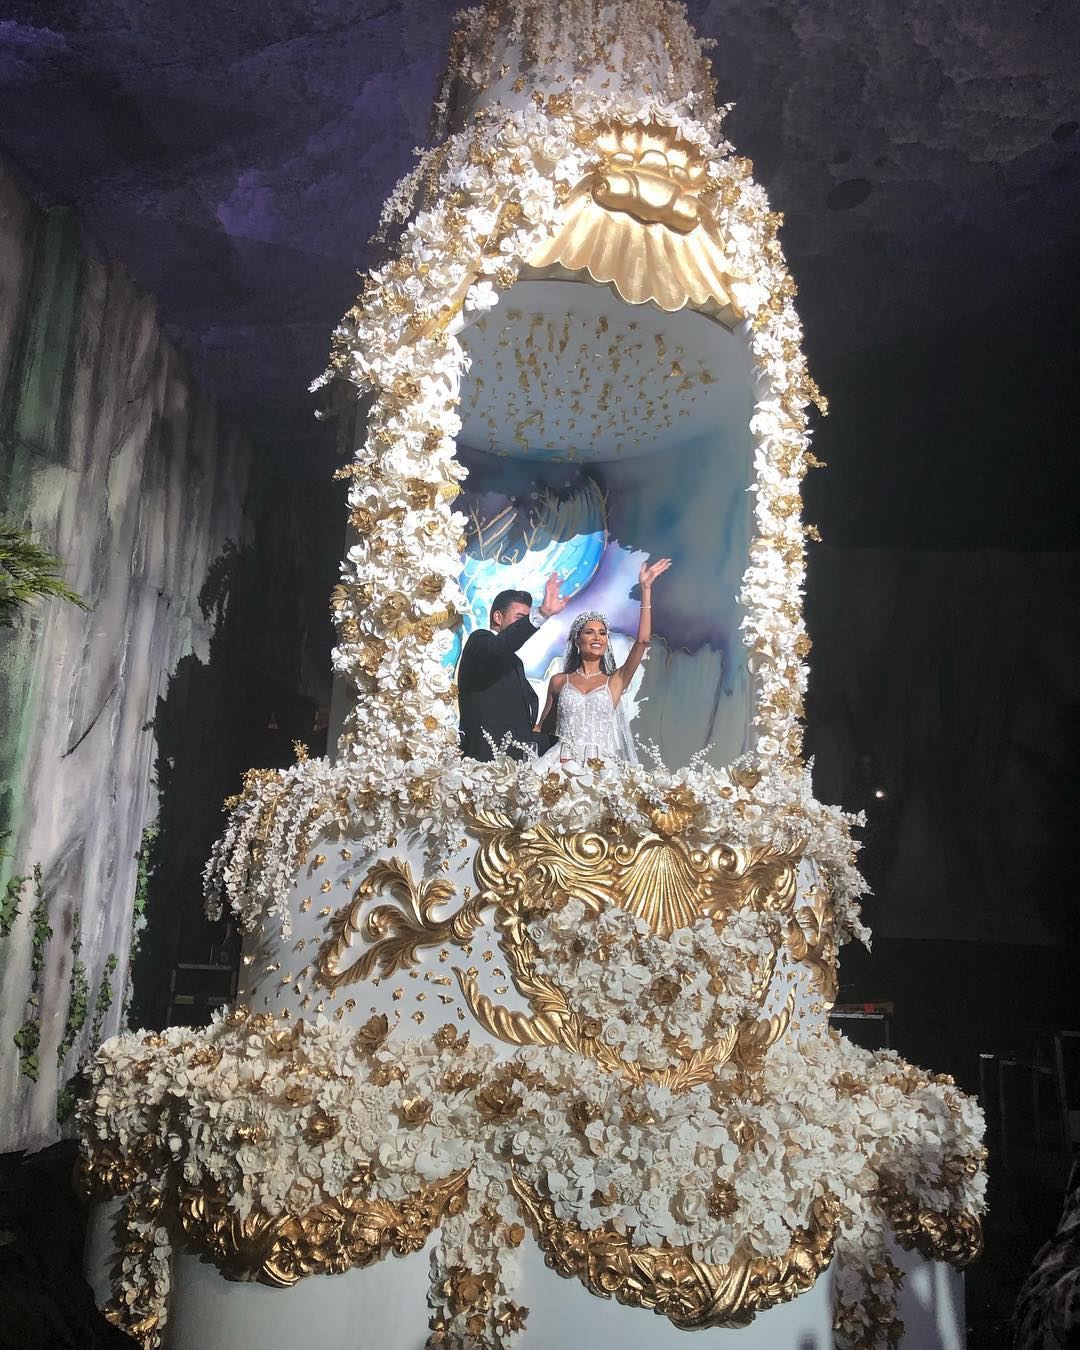 Facts about Alice AbdelAziz Amazing Wedding Cake by Le 43 Catering